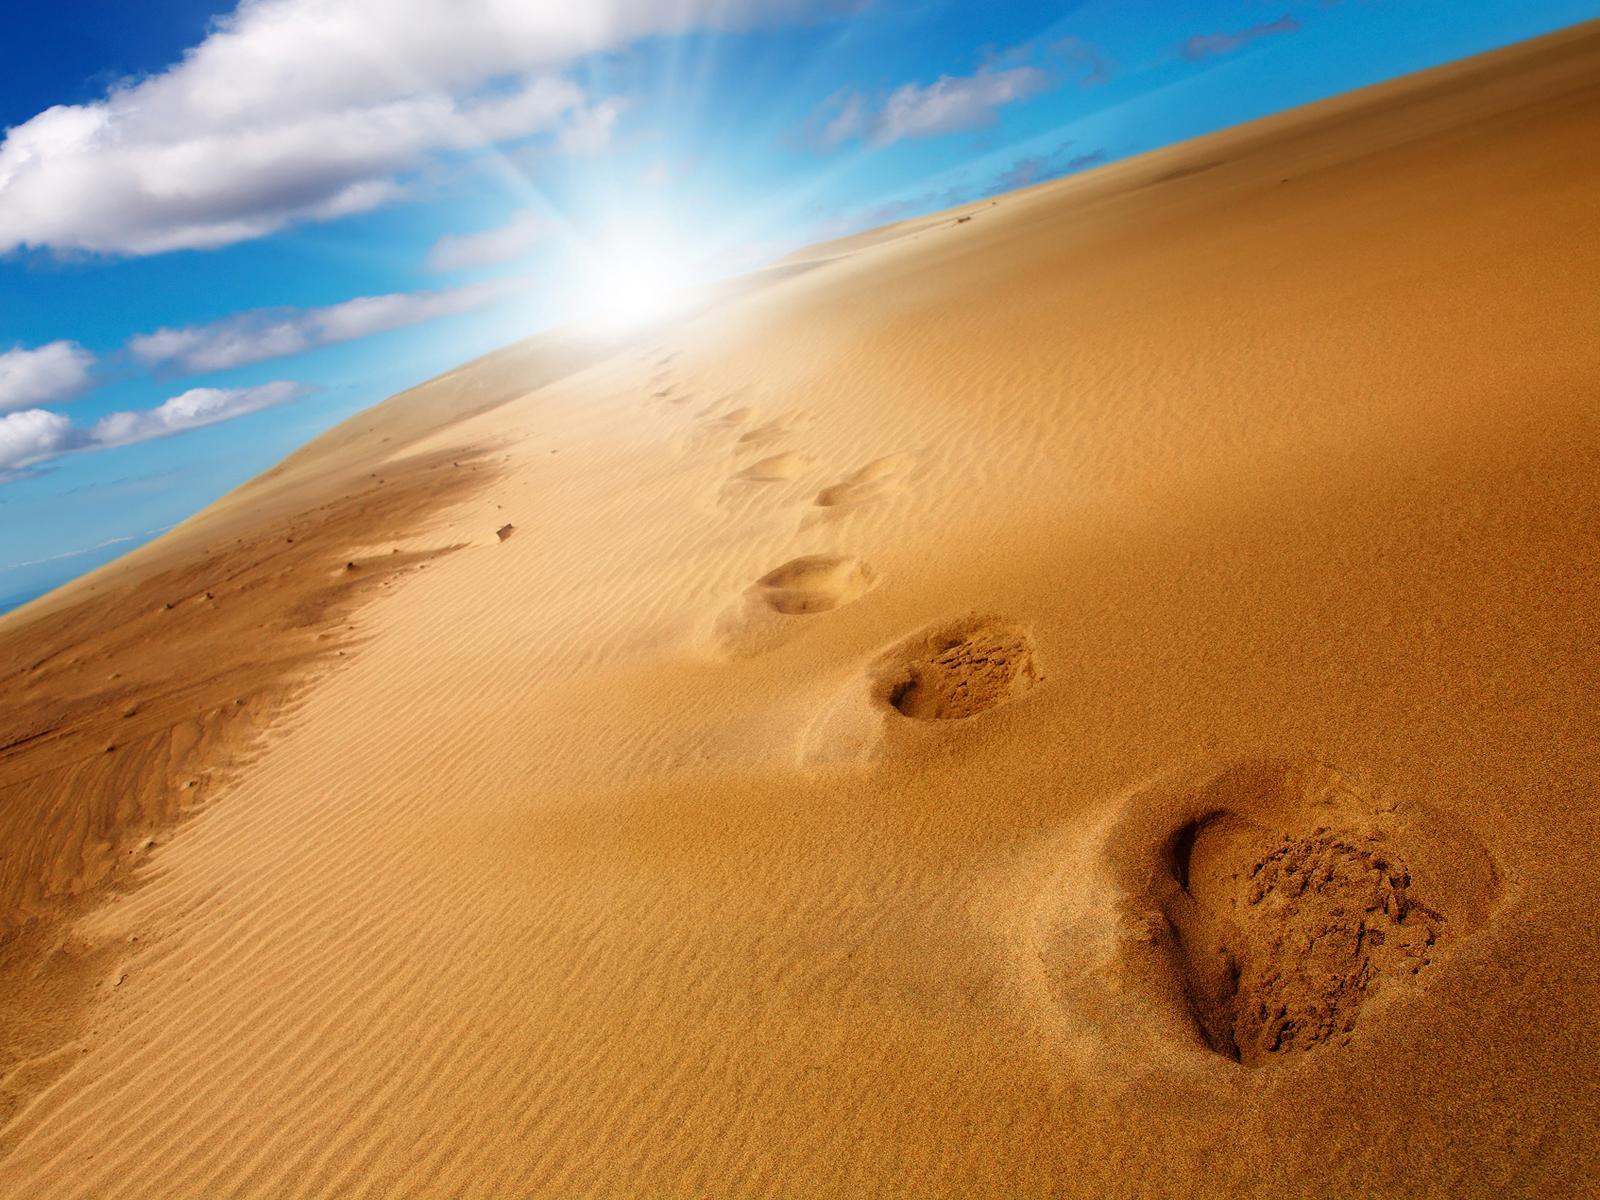 Footprints in Desert Sand wallpapers – On second anniversary of the